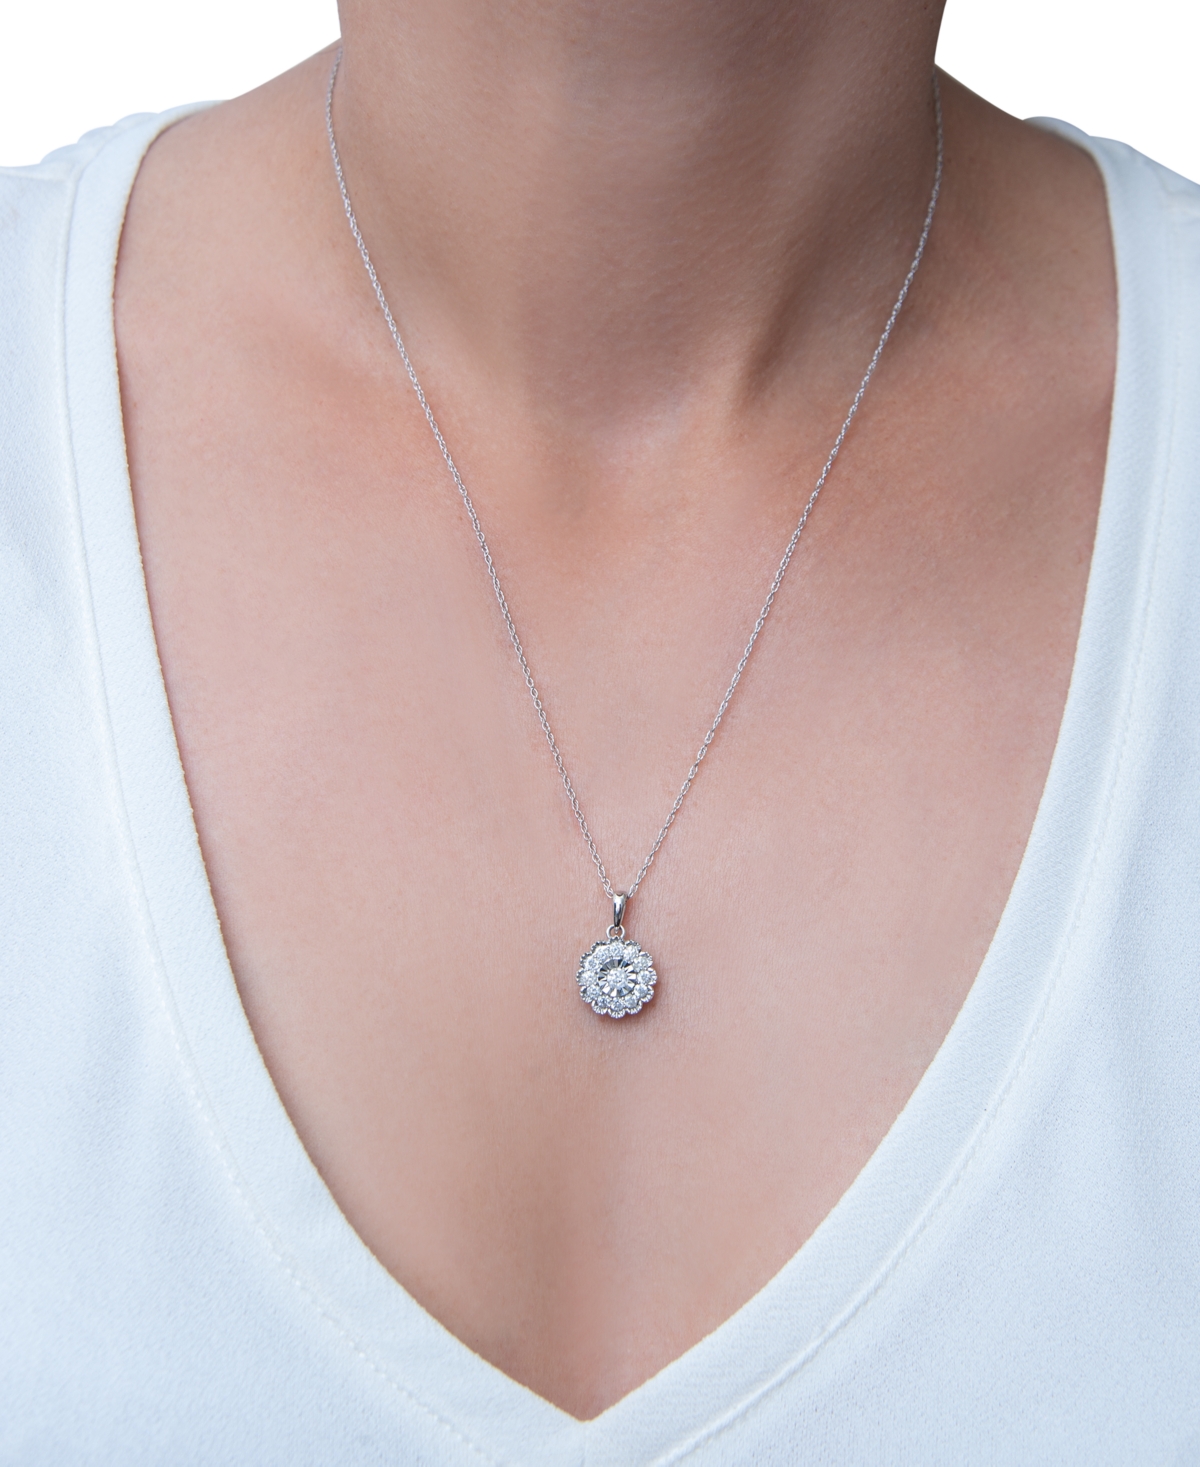 Shop Wrapped In Love Diamond Flower Pendant Necklace (1/2 Ct. Tw) In 14k White Gold, 18" + 2" Extender, Created For Macy'